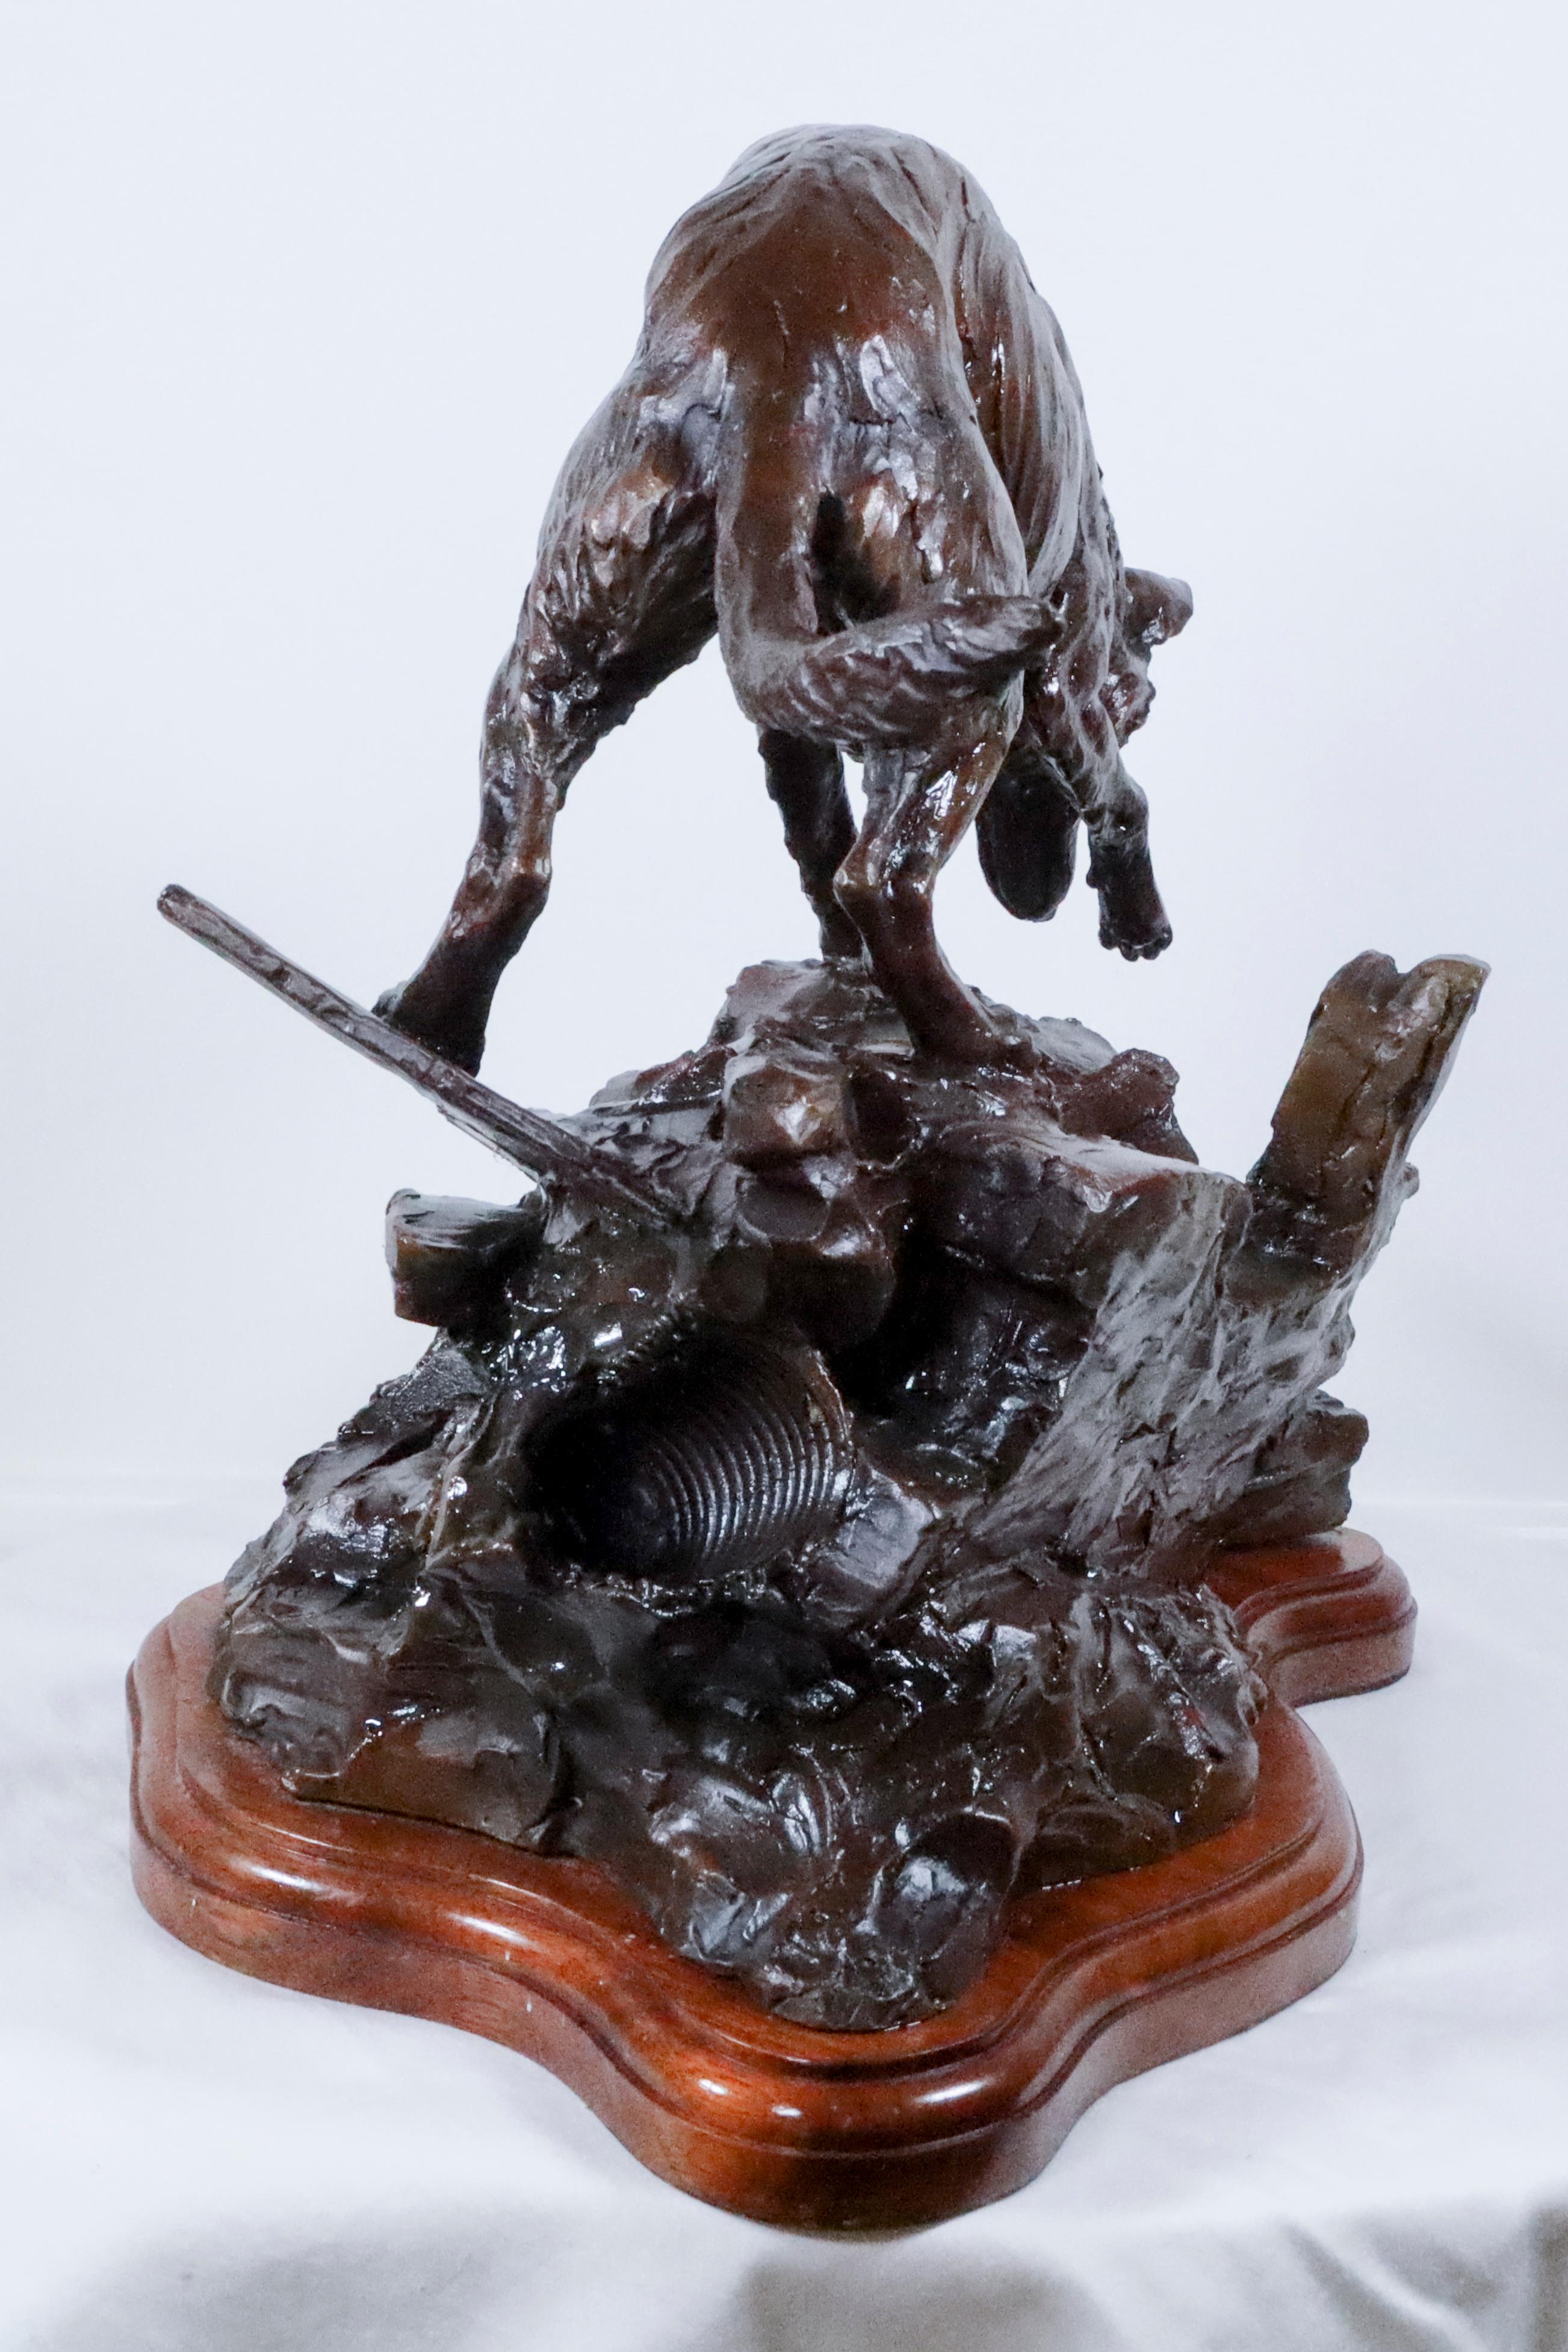 This sculptor is not only an artist, but a vetrinarian.  She knows anatomy as well as she knows breeds and behaviors..  This beautiful bronze depicts a German Shepherd Dog searching for survivors after September 11.   It could be one of any